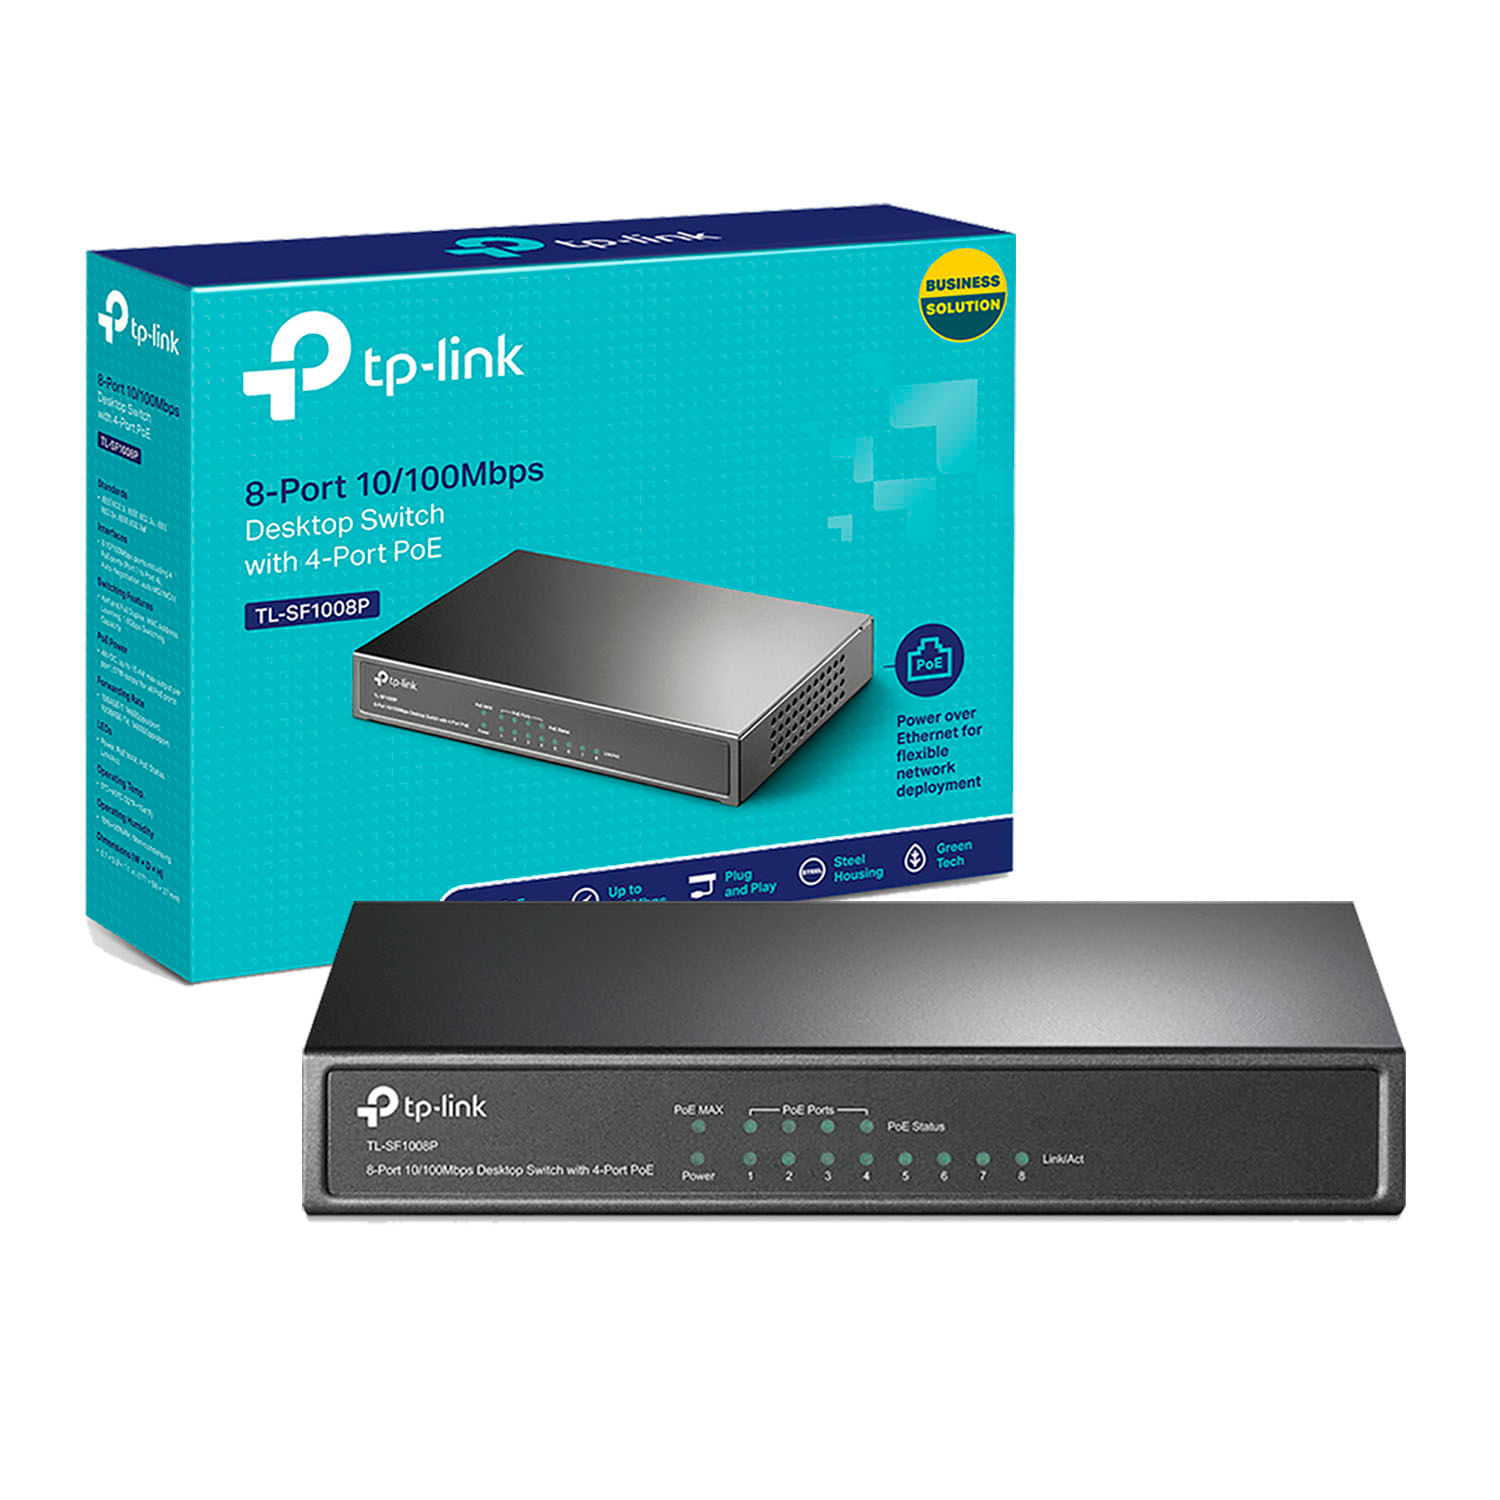 Switch Tl Sf1008p Tp Link 8 Puertos 10,100 Mbps Conector Poe